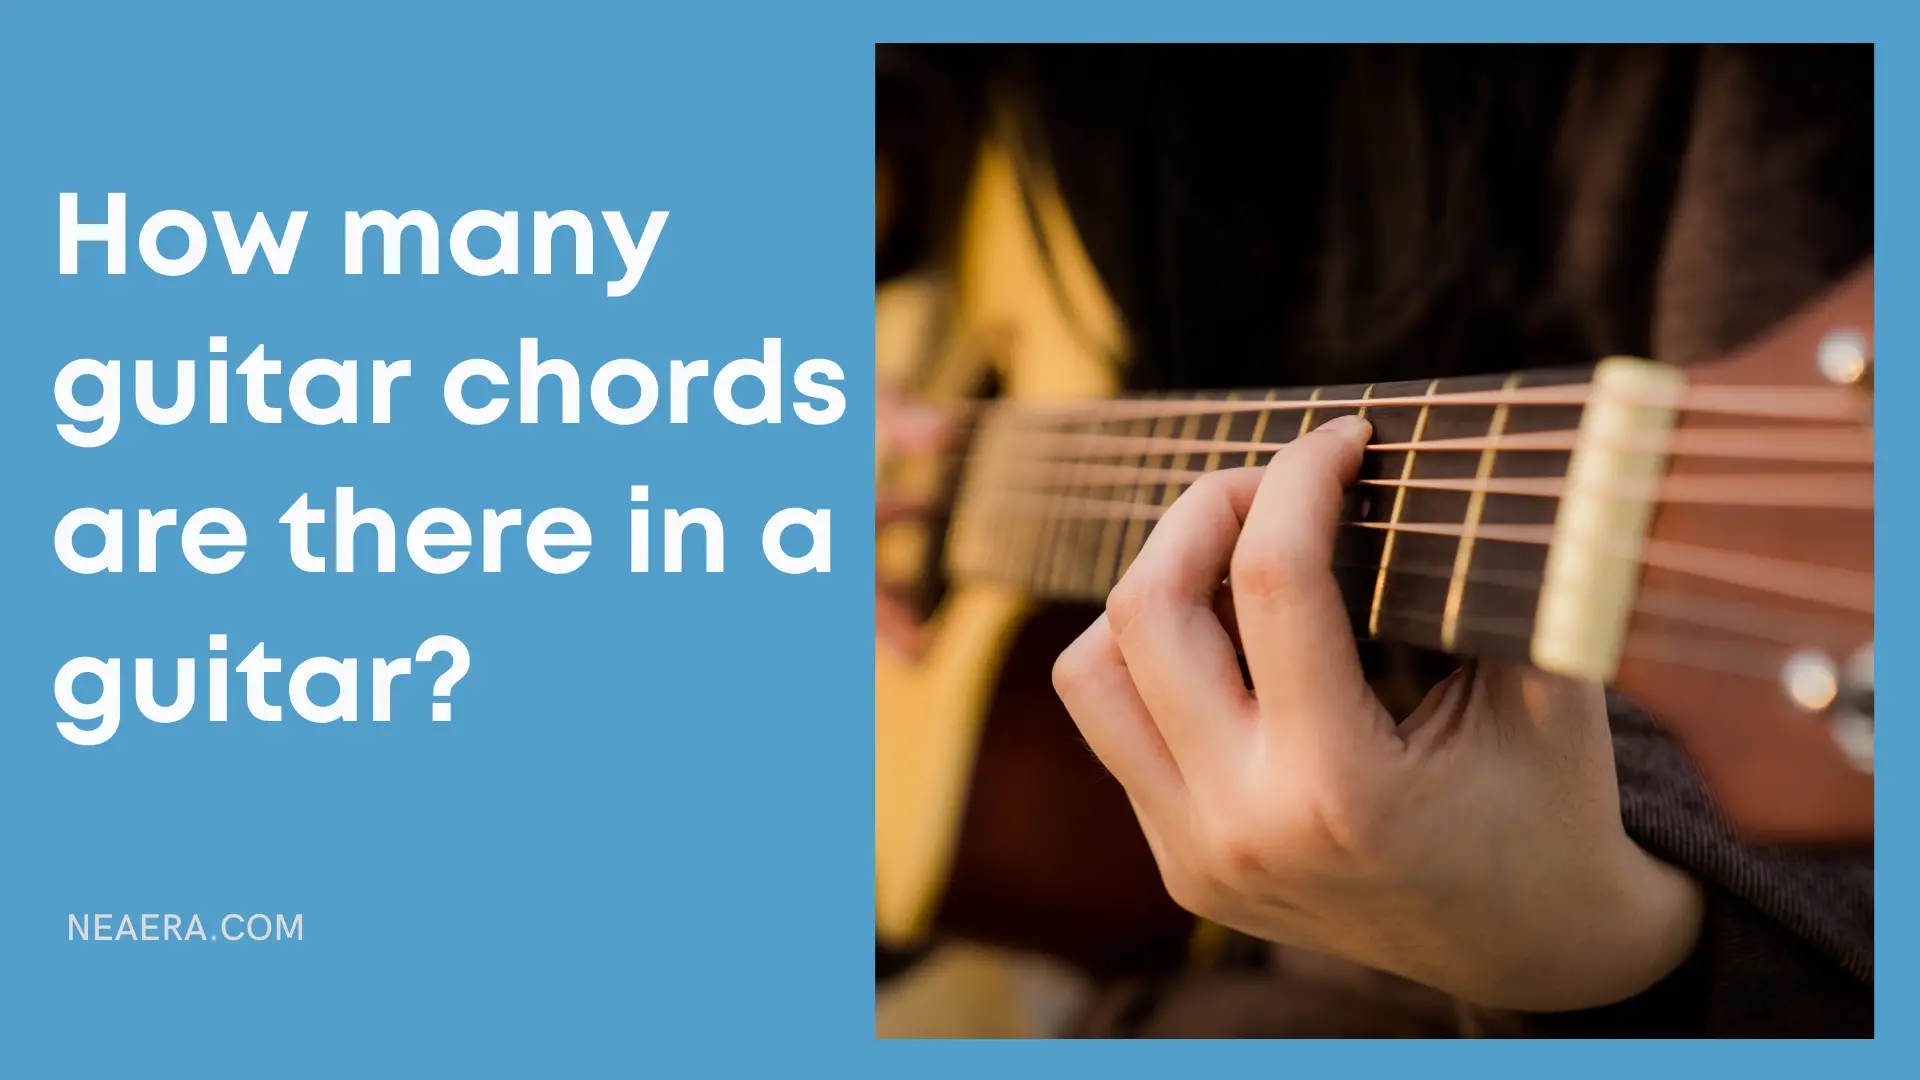 How many guitar chords are there in a guitar?